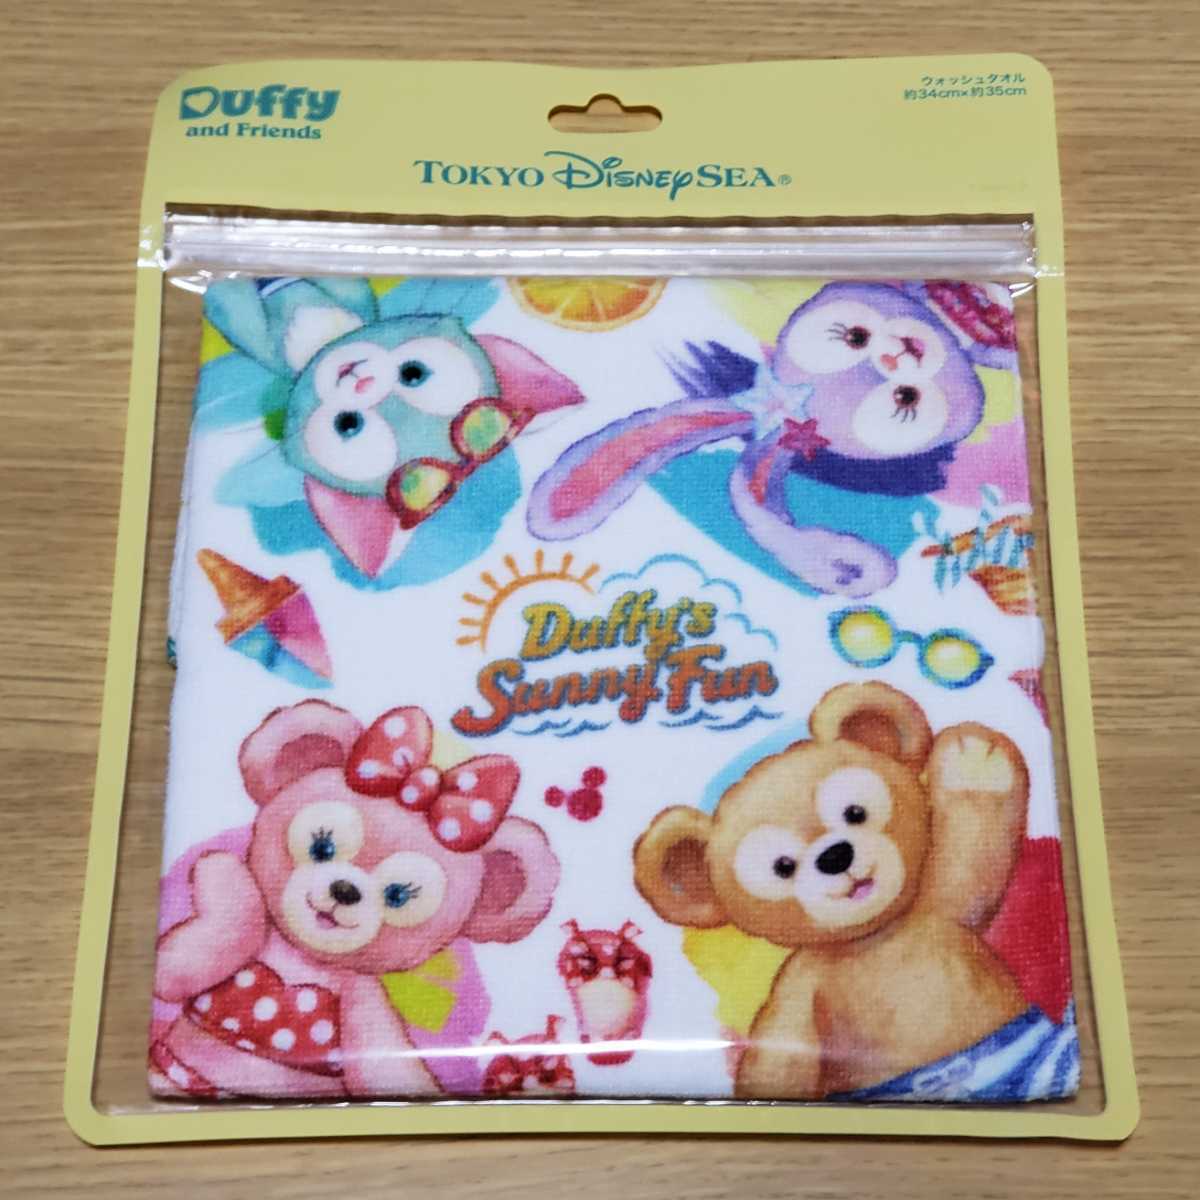 Duffy and friends ウォッシュタオル